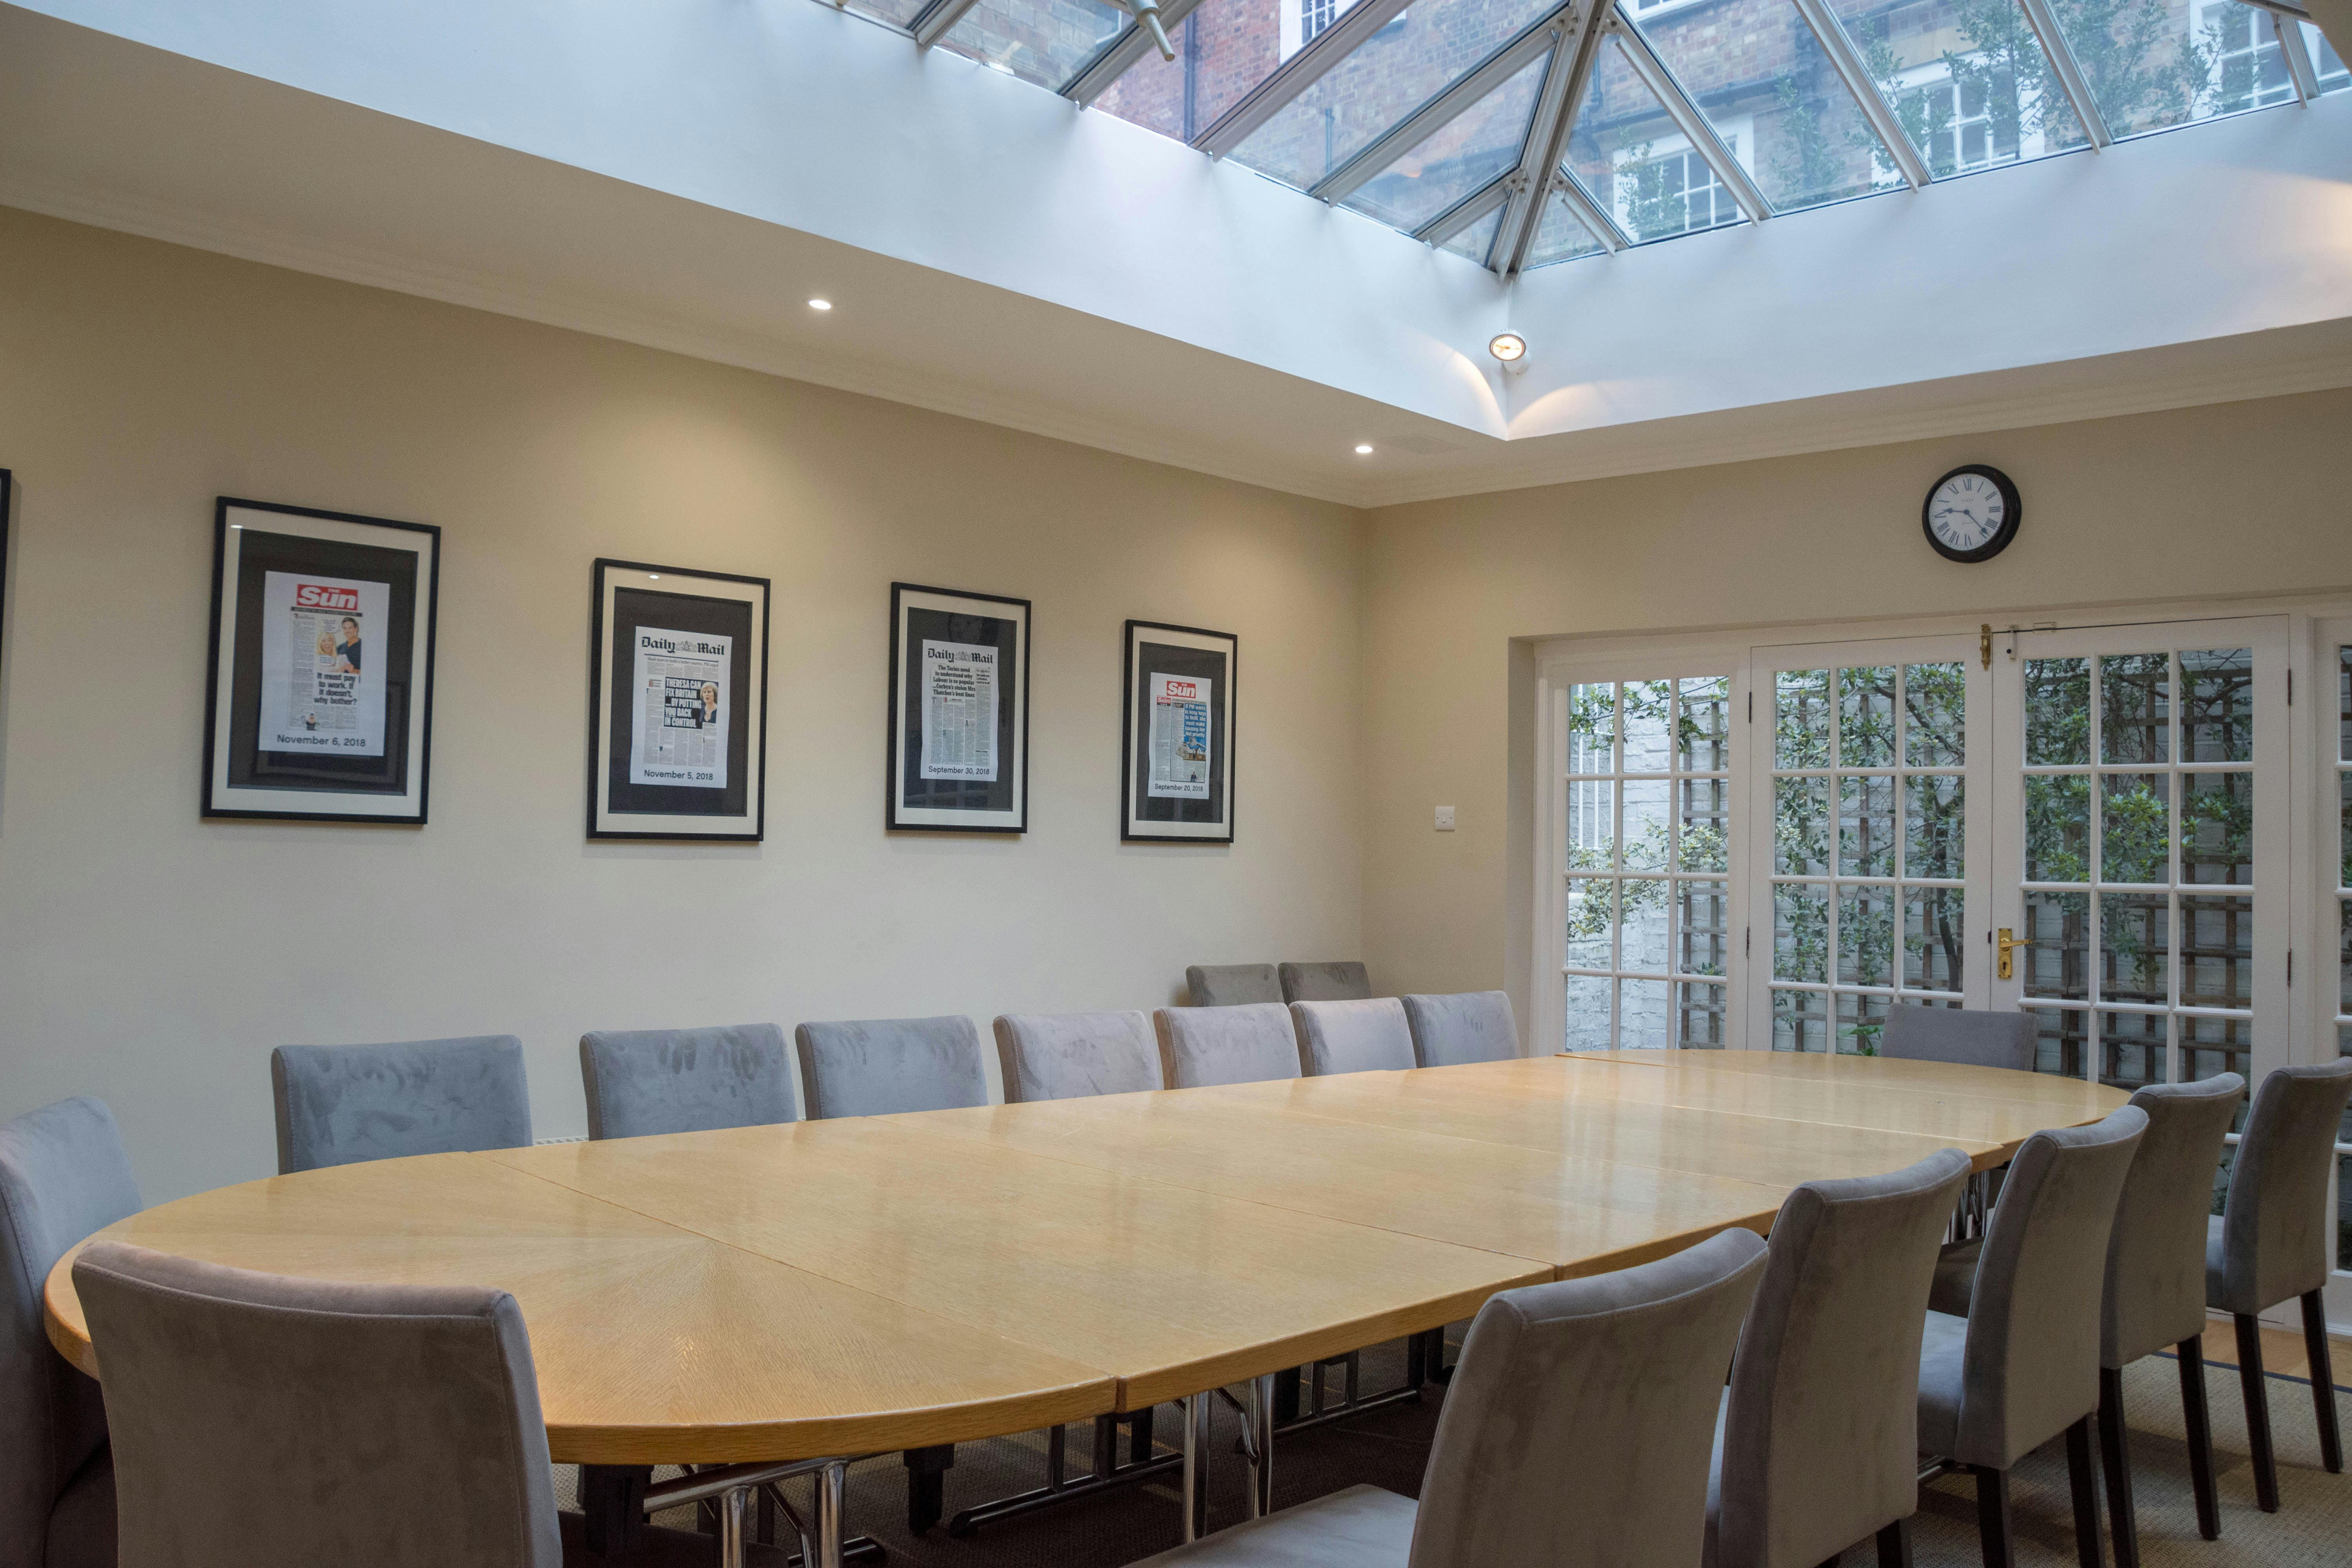 Centre for Policy Studies - Boardroom image 5